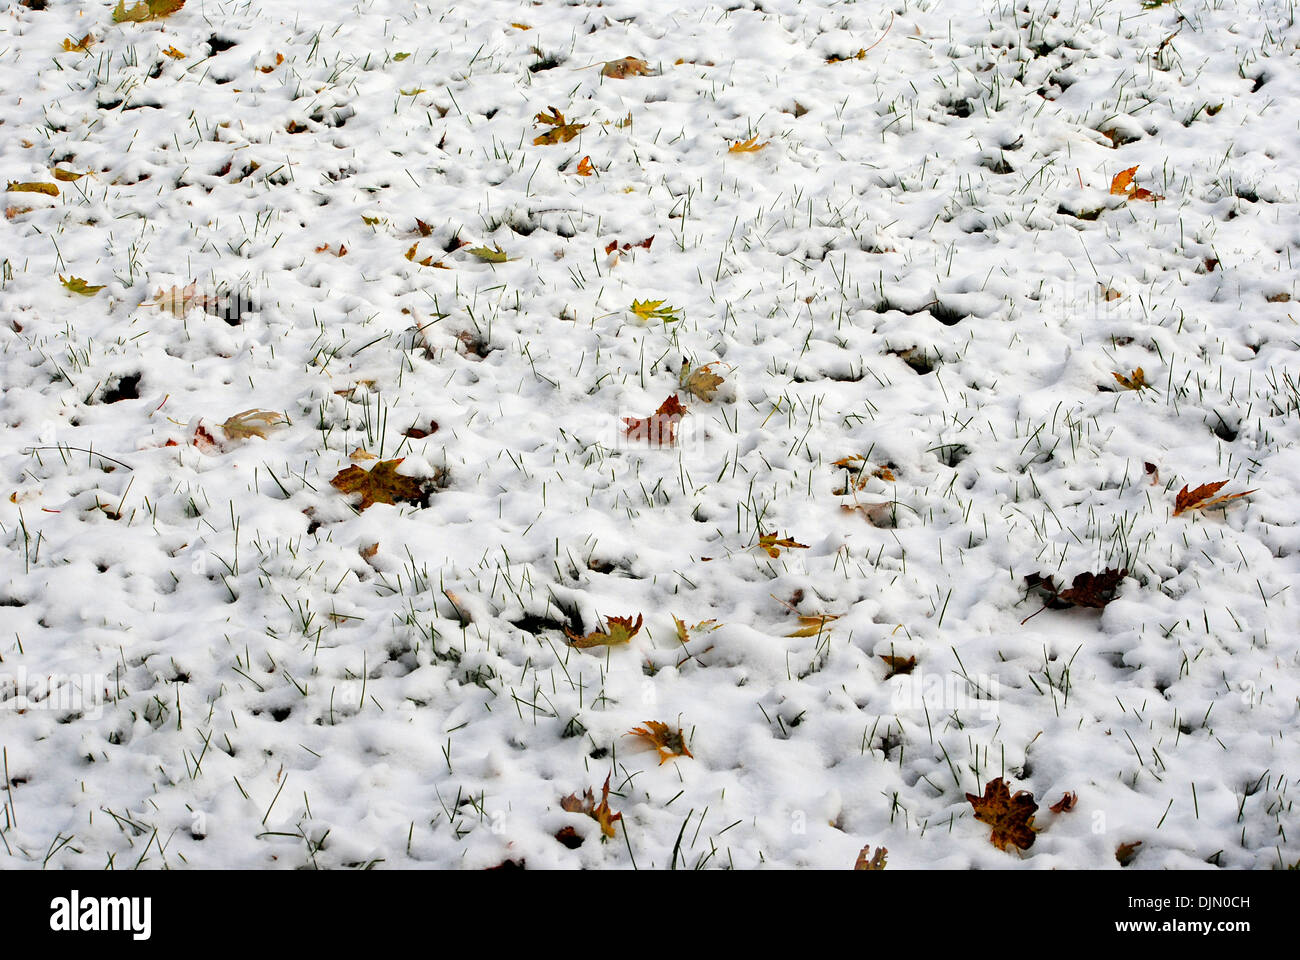 Snow and leaves blanket the ground,great for late fall and early winter background scenes. Stock Photo